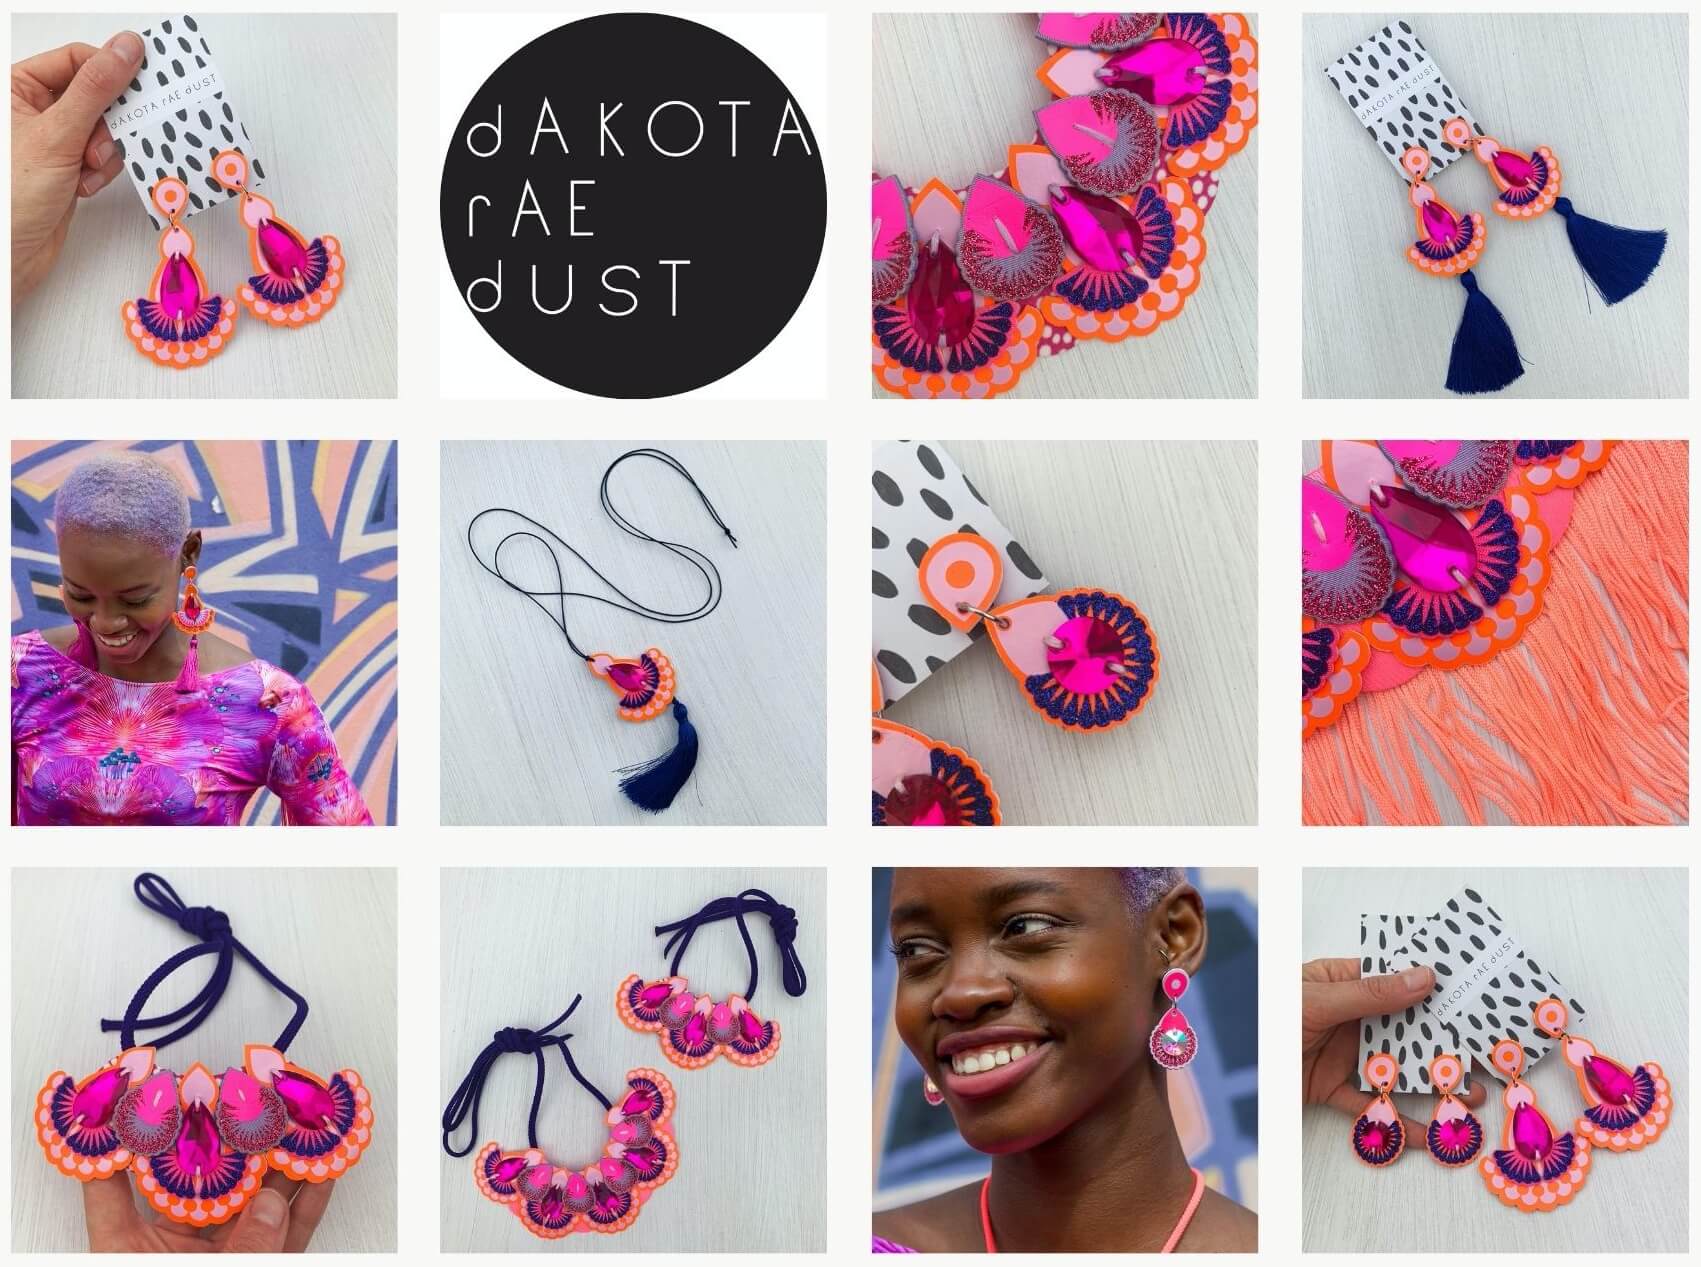 A grid of 4 x 3 colourful photographs of jewellery from dakota rae dust's latest pink and orange textile jewellery collection. 